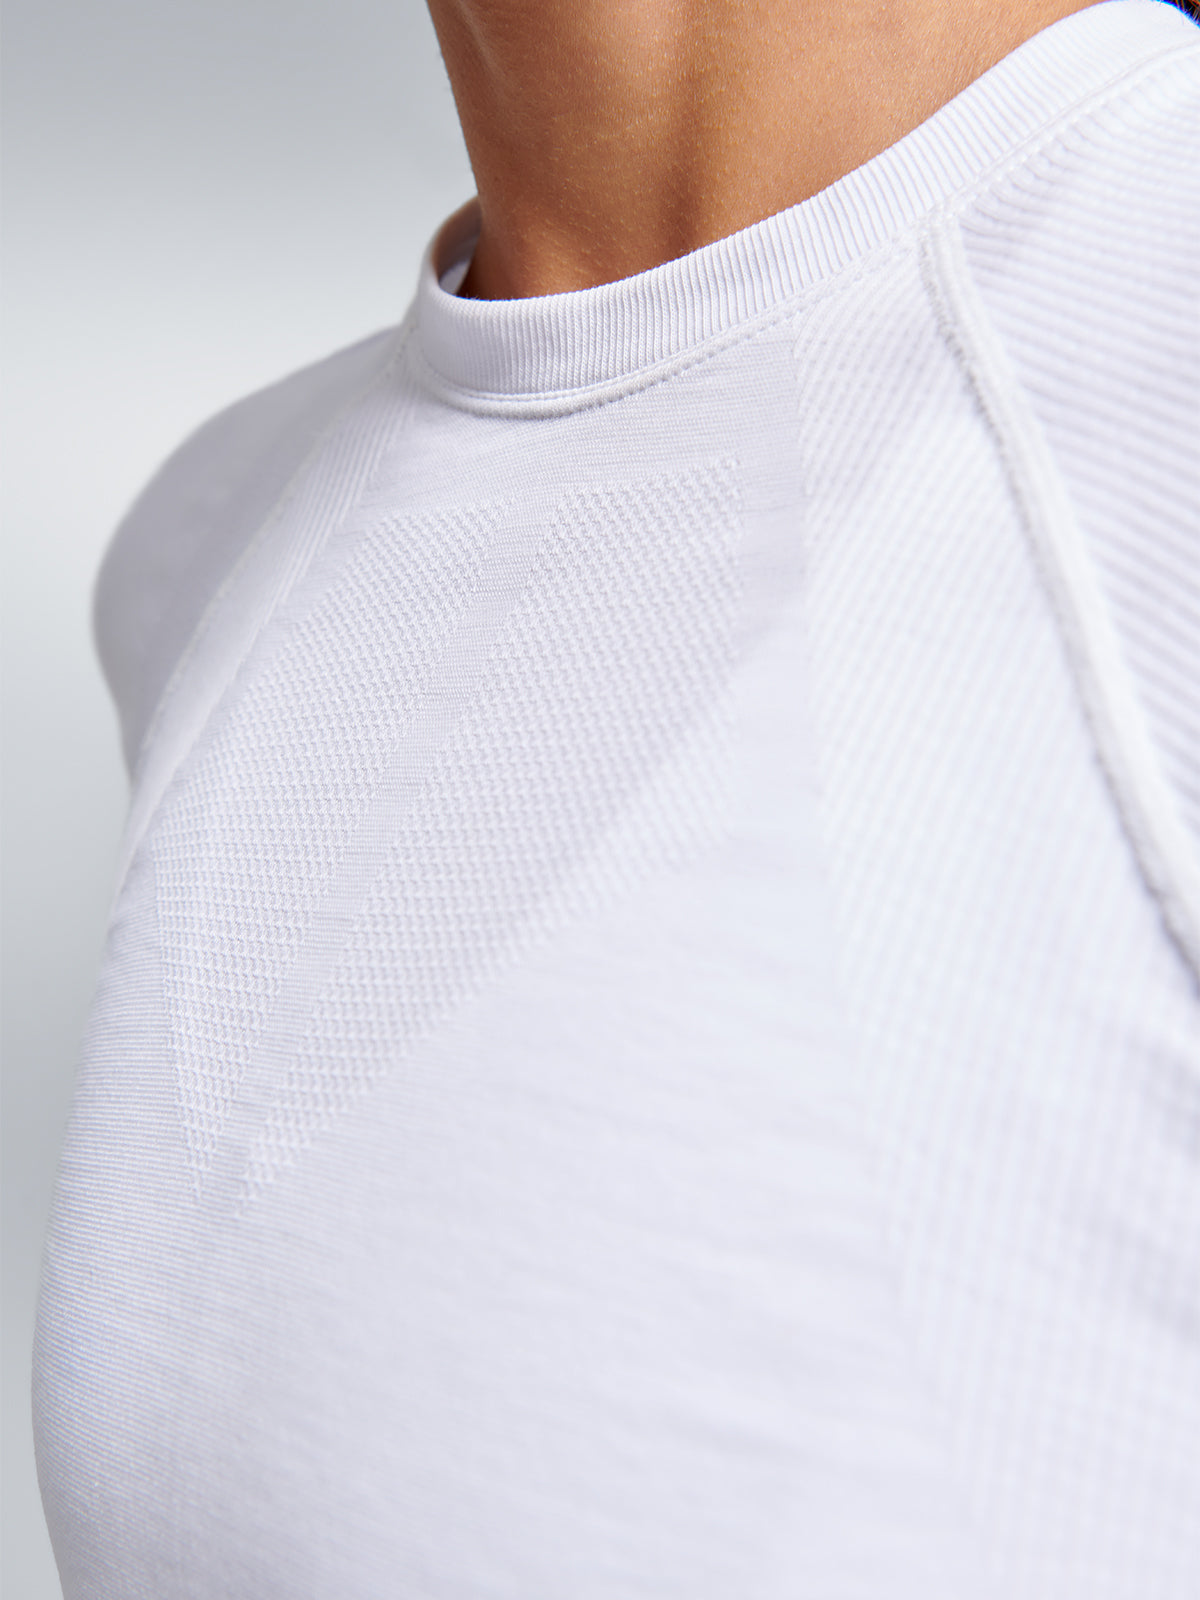 HERE TODAY Cropped Tee White